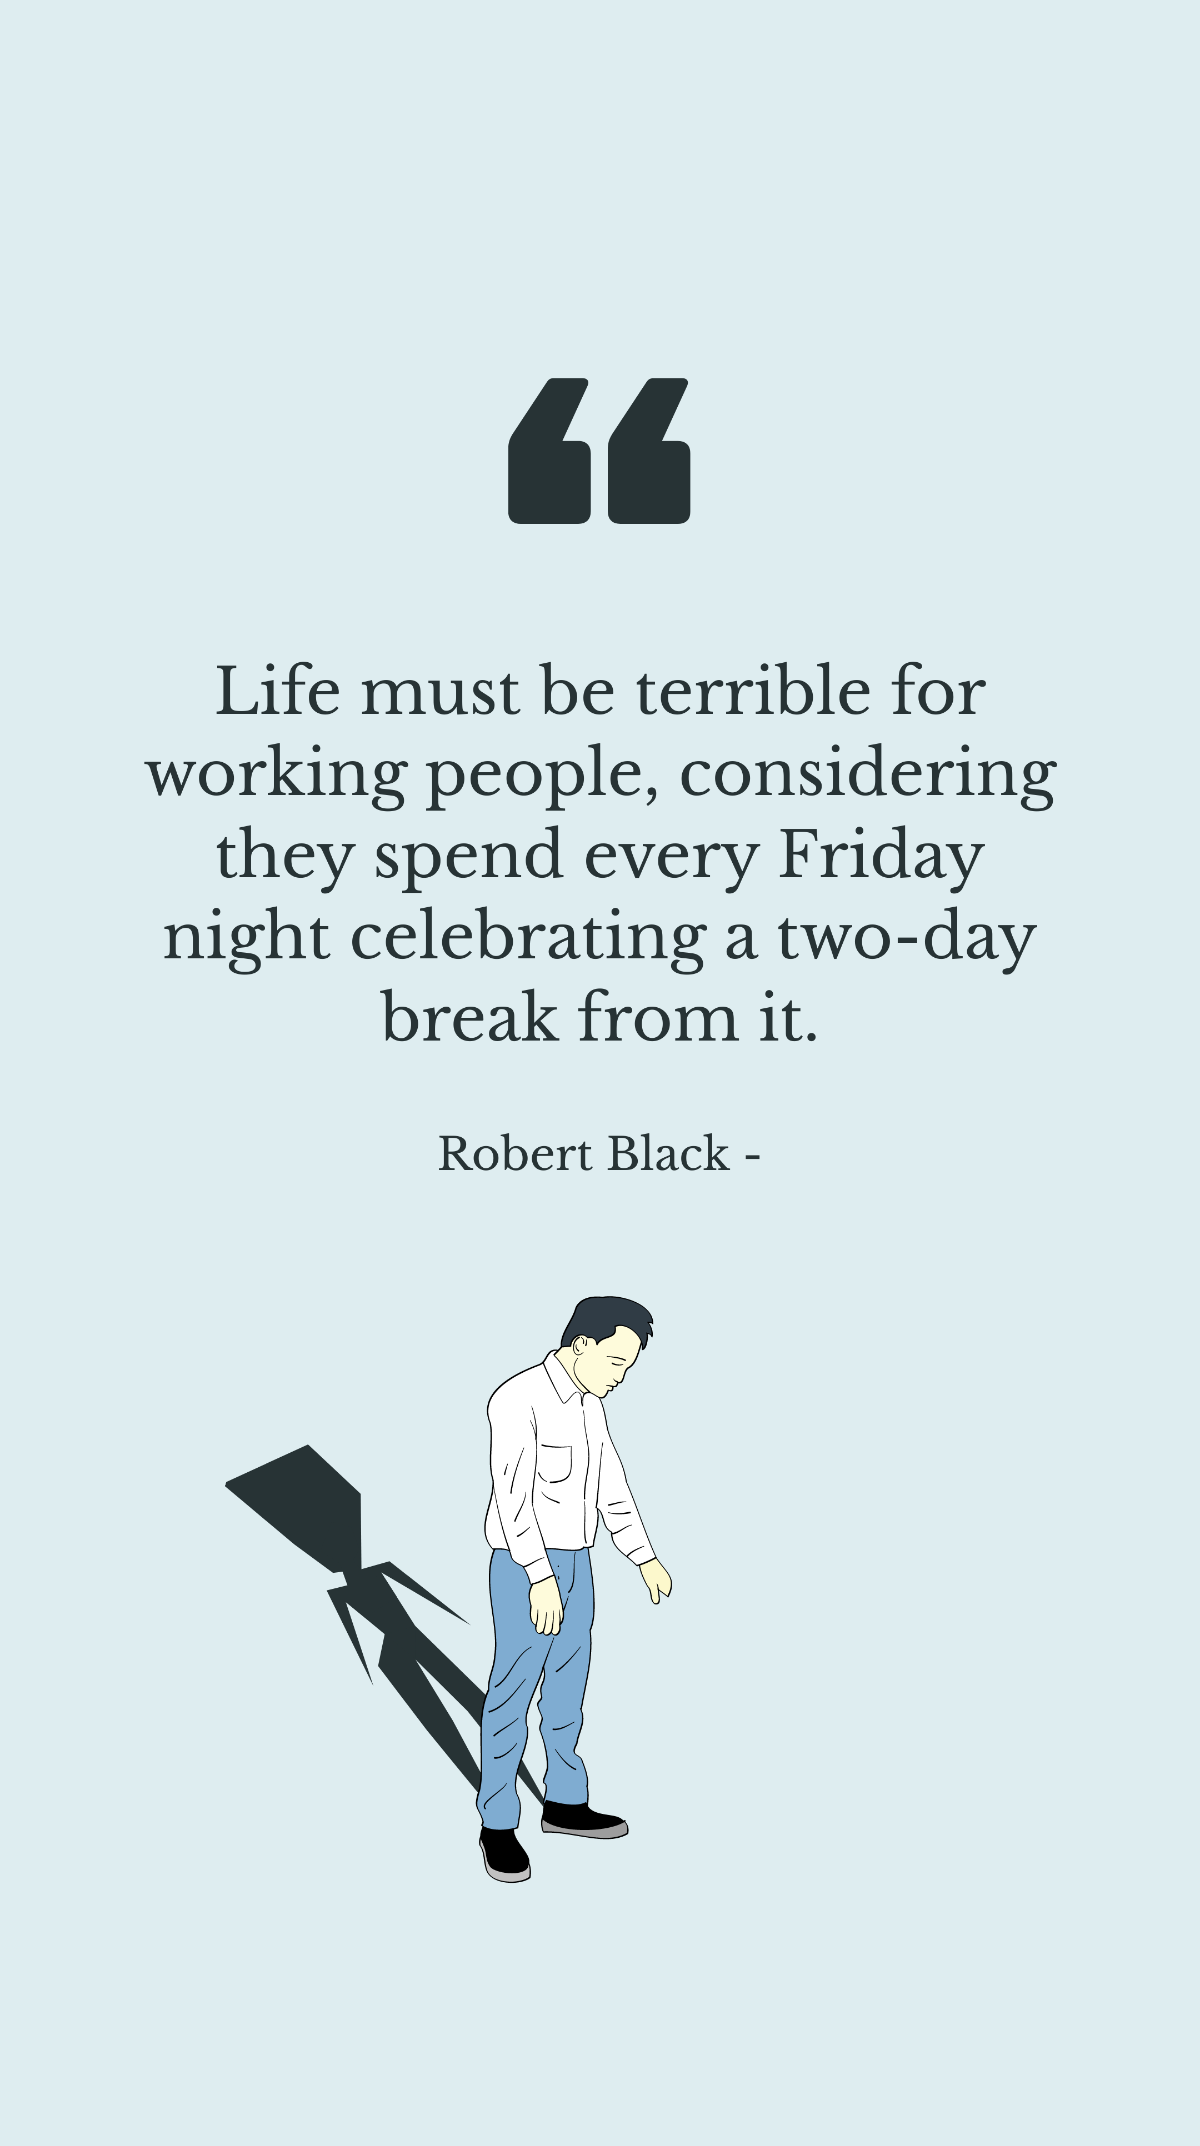 Robert Black - Life must be terrible for working people, considering they spend every Friday night celebrating a two-day break from it. Template